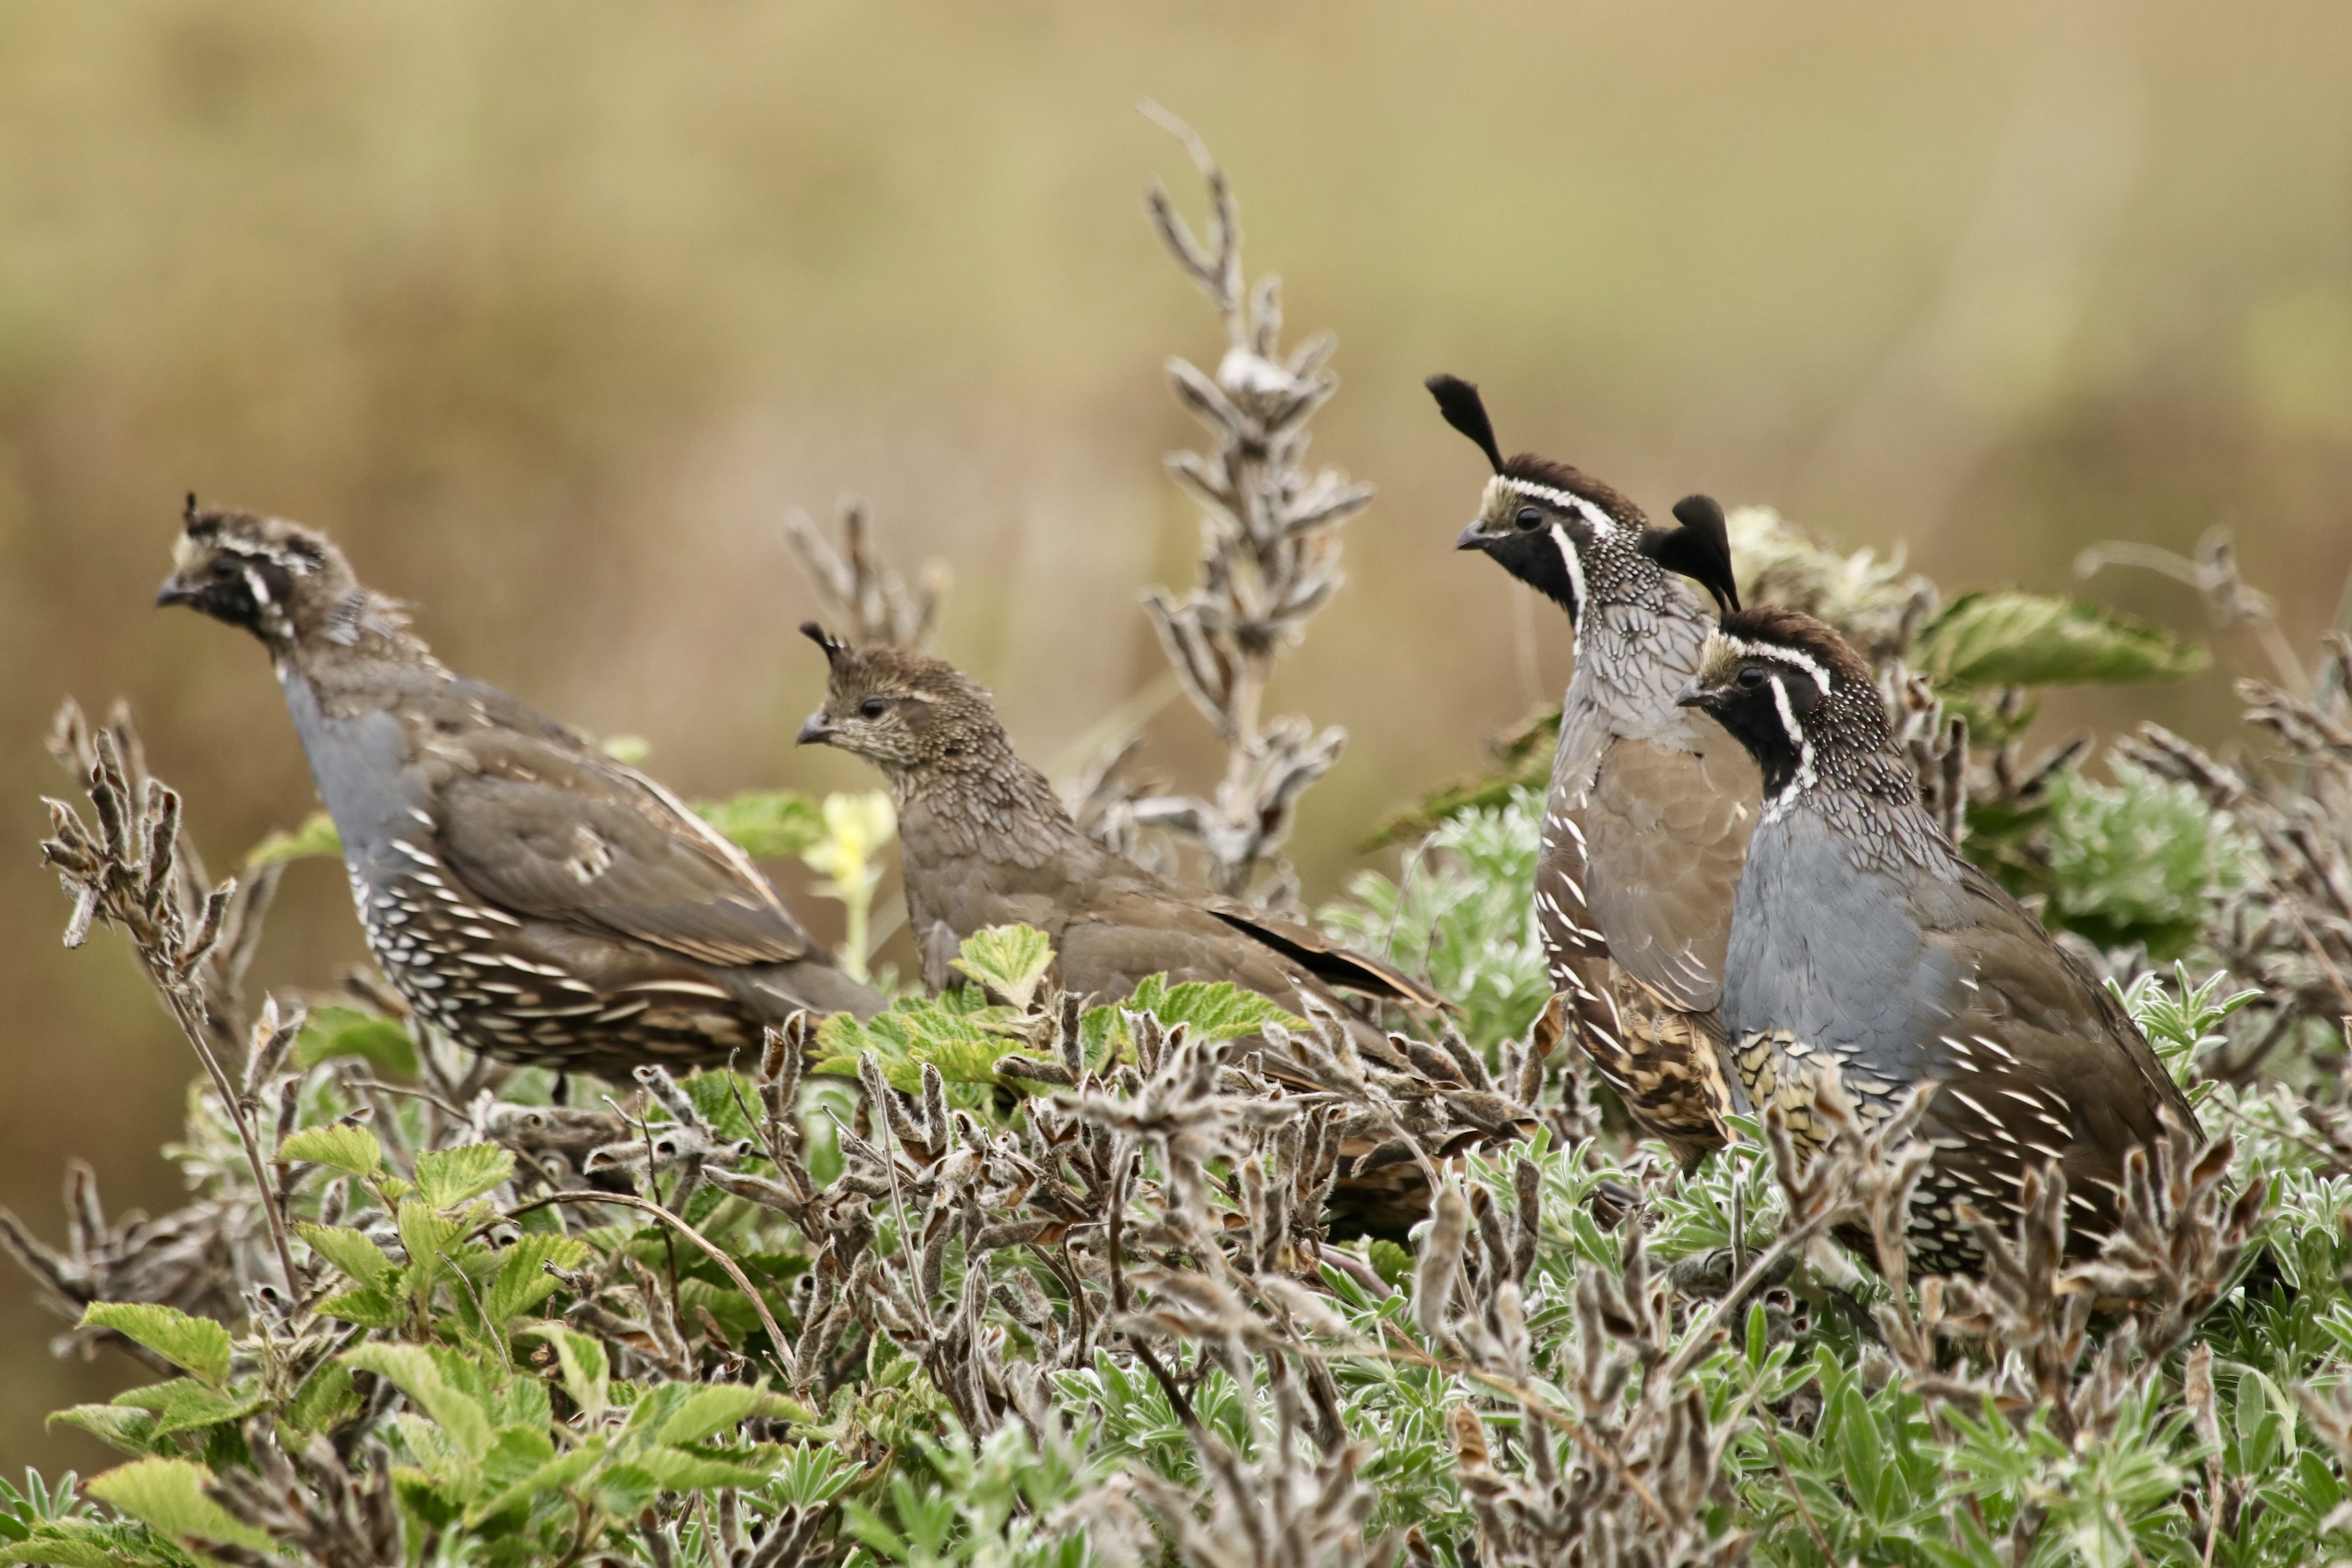 Four California quail stand among green and brown plants on the ground